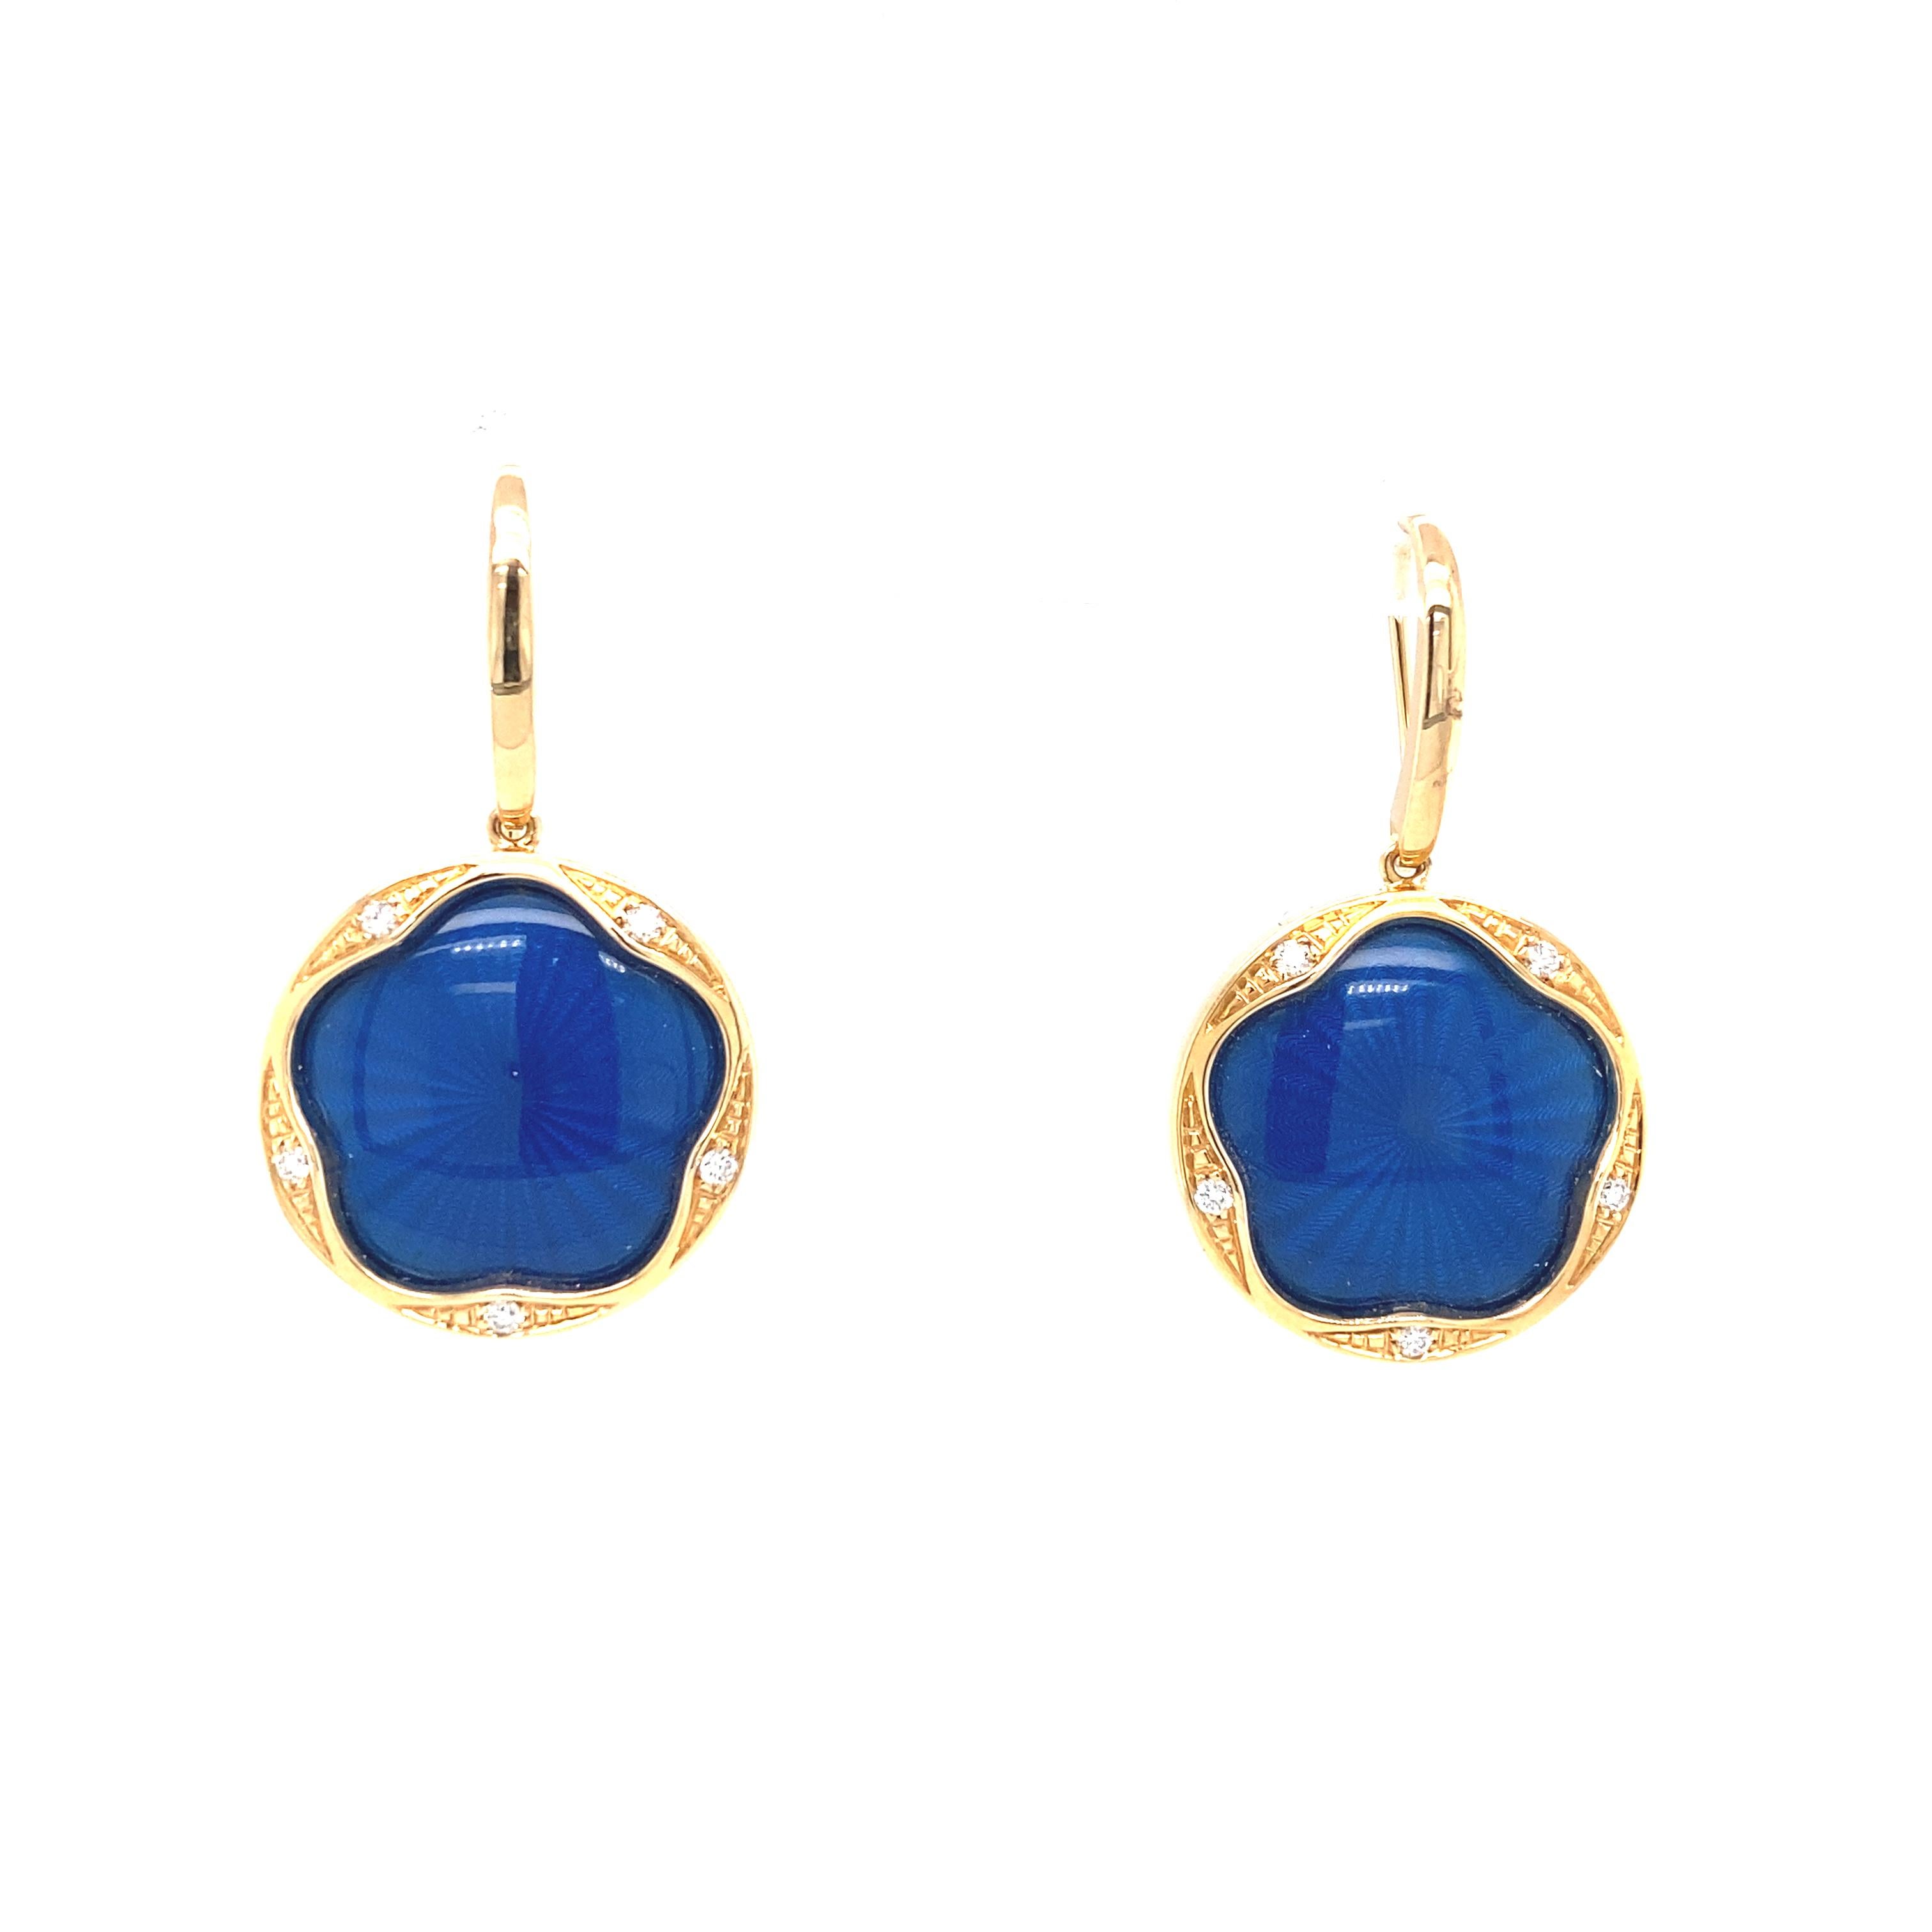 Victor Mayer round drop earrings 18k rose gold and 925/- silver, Macaron collection, translucent petrol blue vitreous enamel, guilloche, 10 diamonds, total 0.15 ct, briliant cut, G VS, Diameter app. 18.9 mm, height with eyelet app. 33.8 mm

About